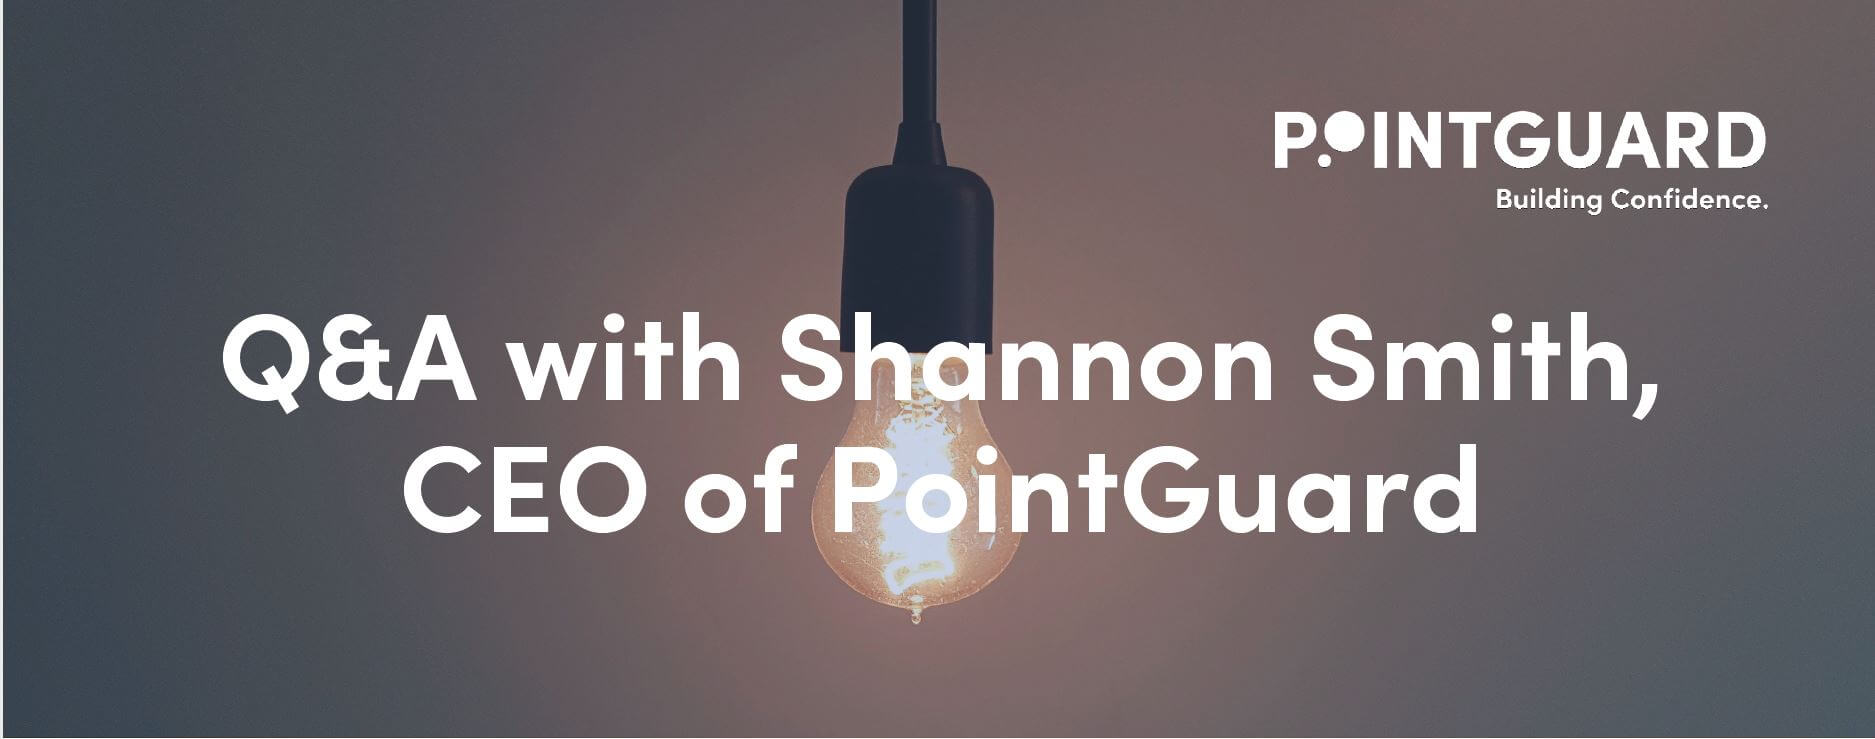 Q&A with Shannon Smith, CEO of PointGuard